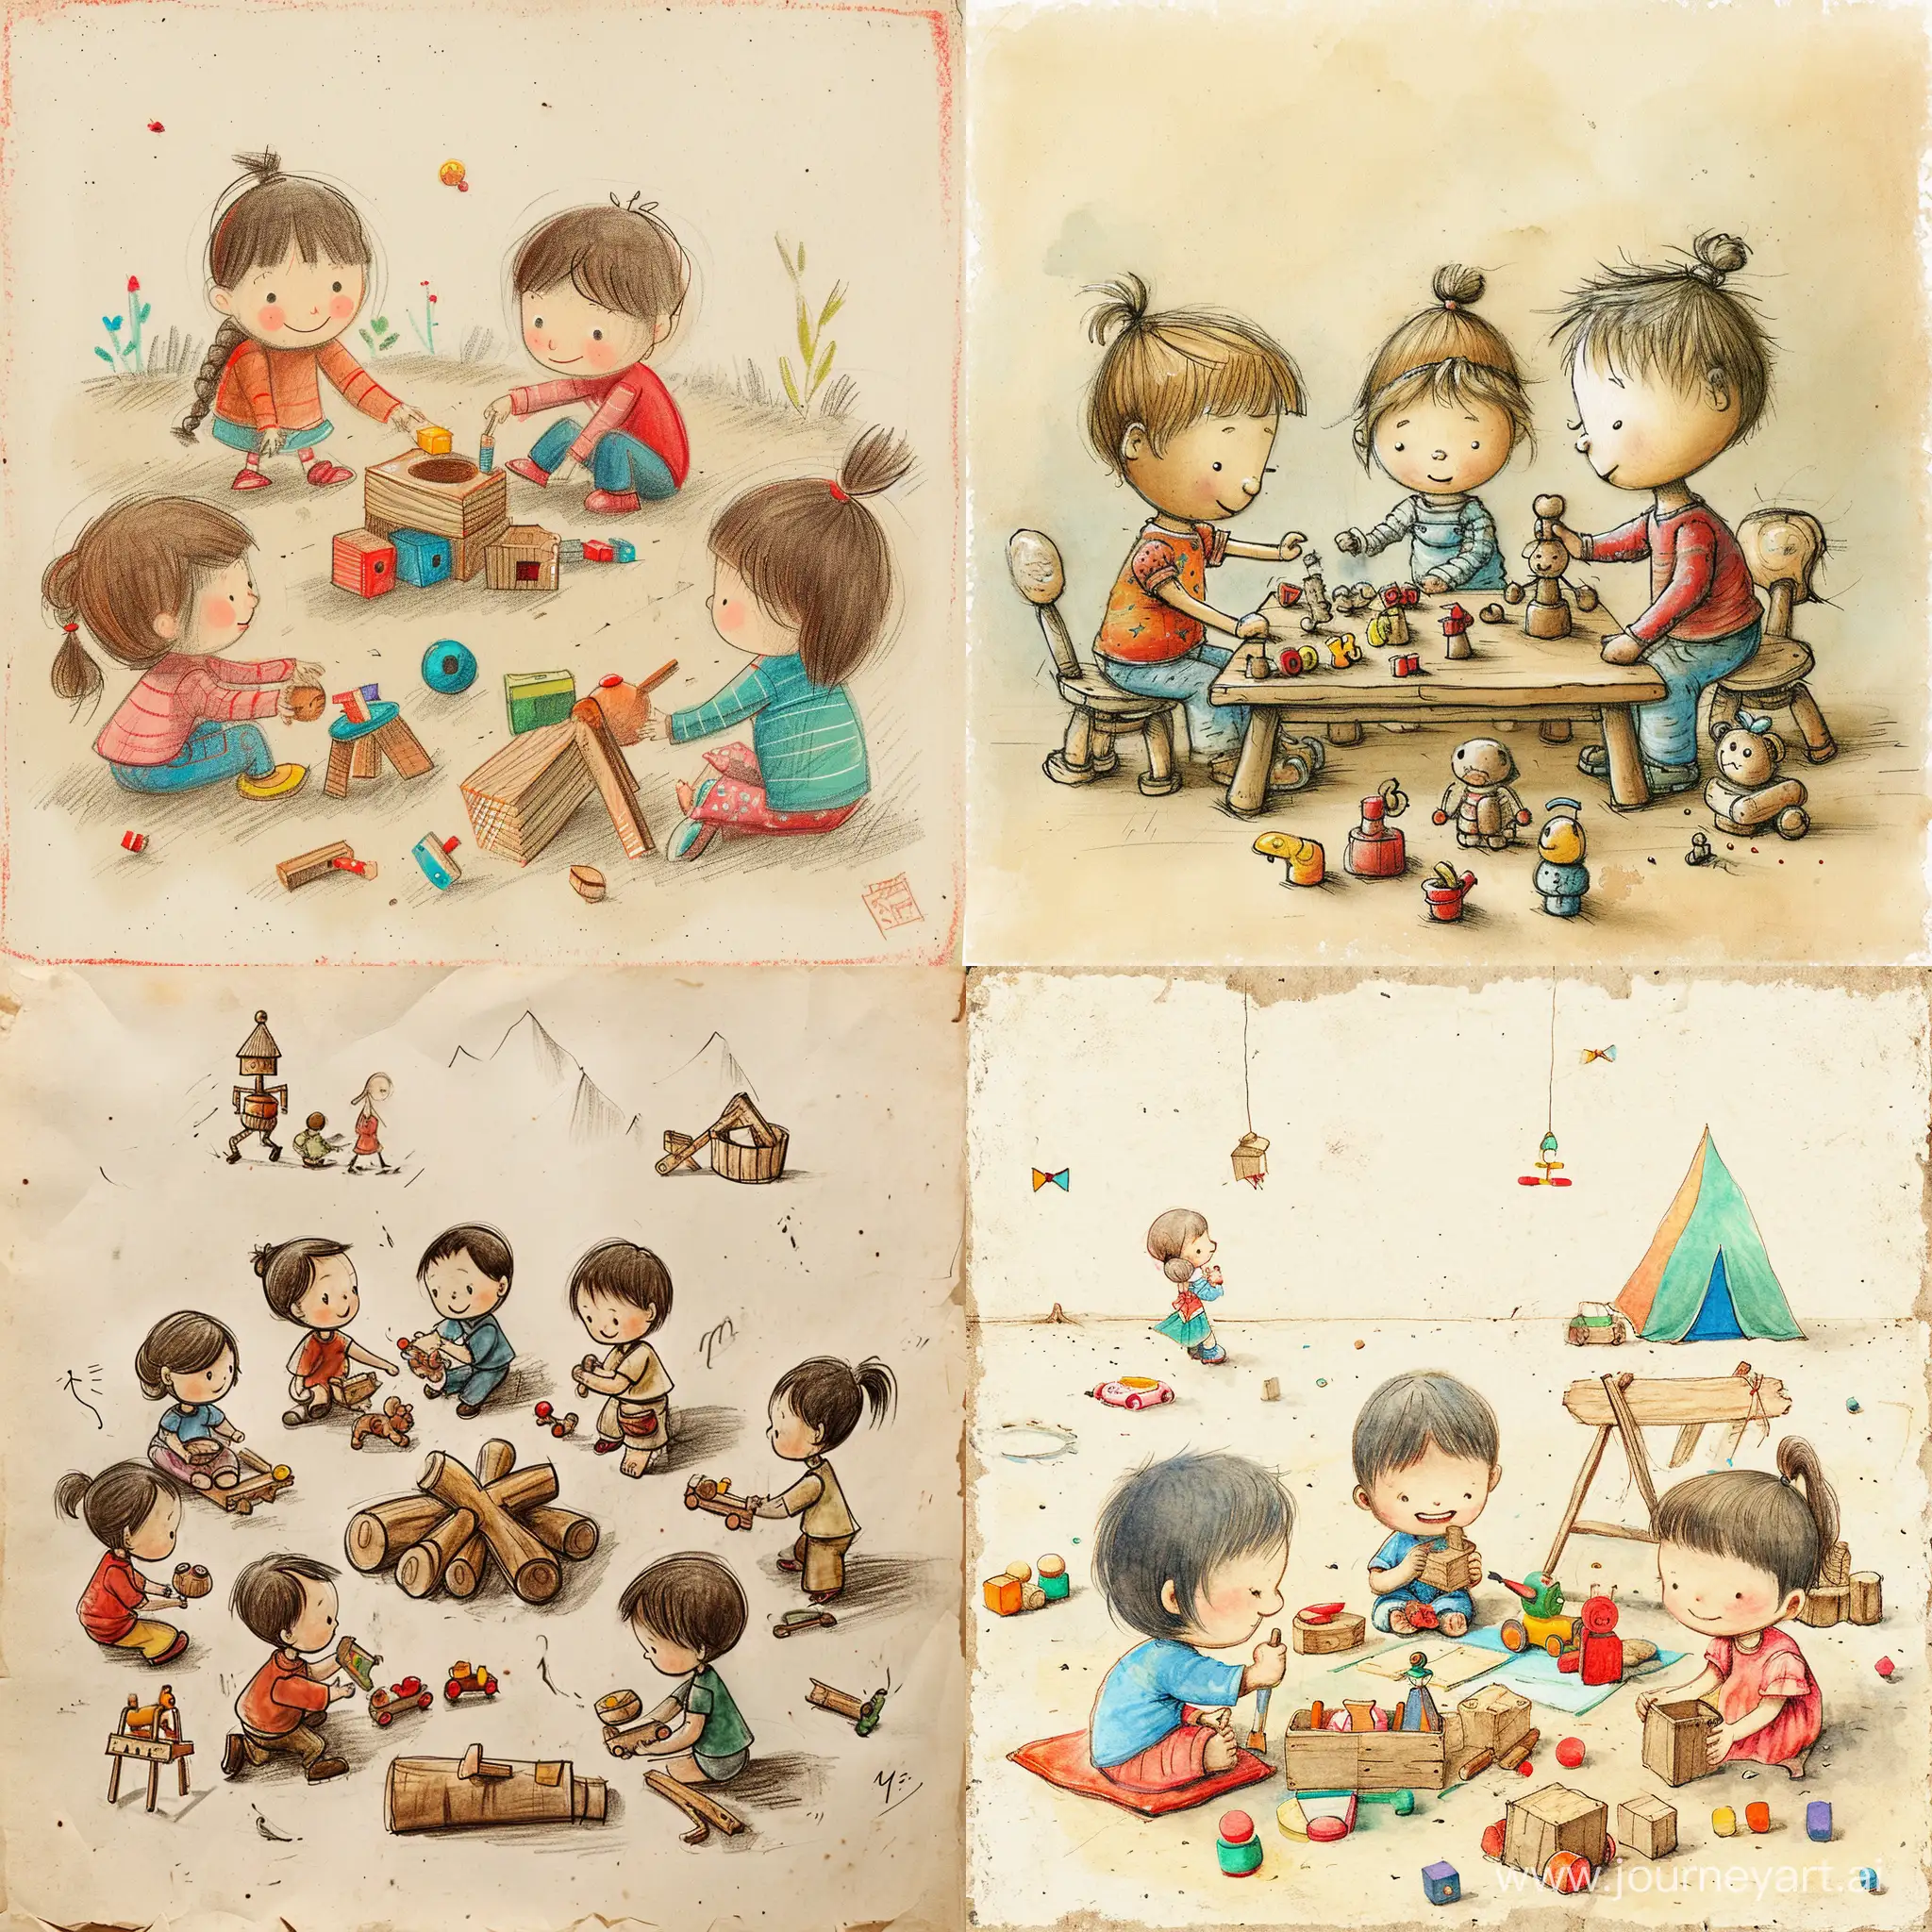 Joyful-Children-Playing-with-Wooden-Toys